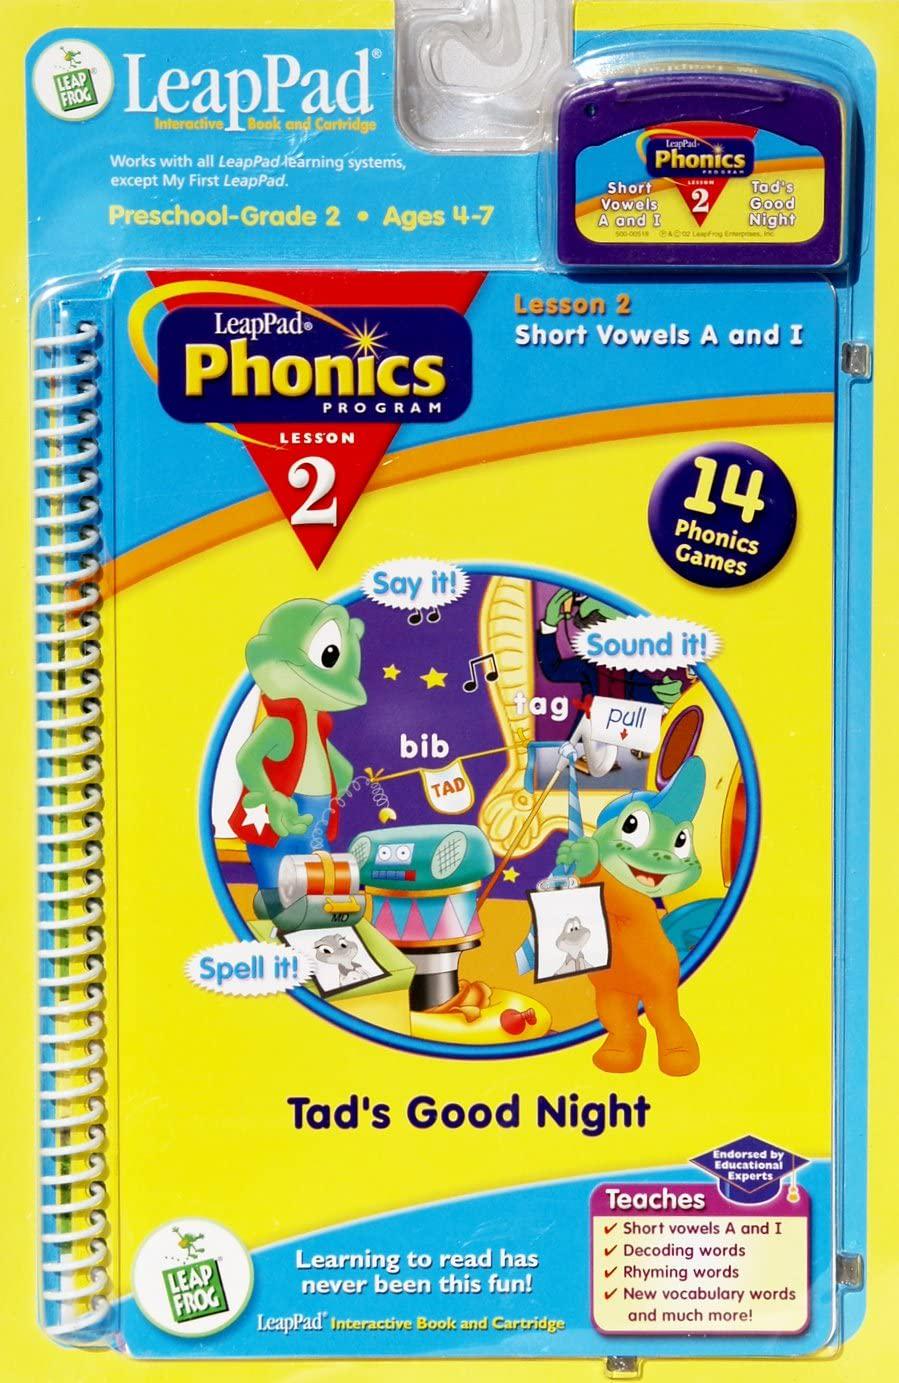 LeapPad, LeapPad Phonics Program Lesson 2: Short Vowels A and I: Tad's Good Night: Book and Cartridge